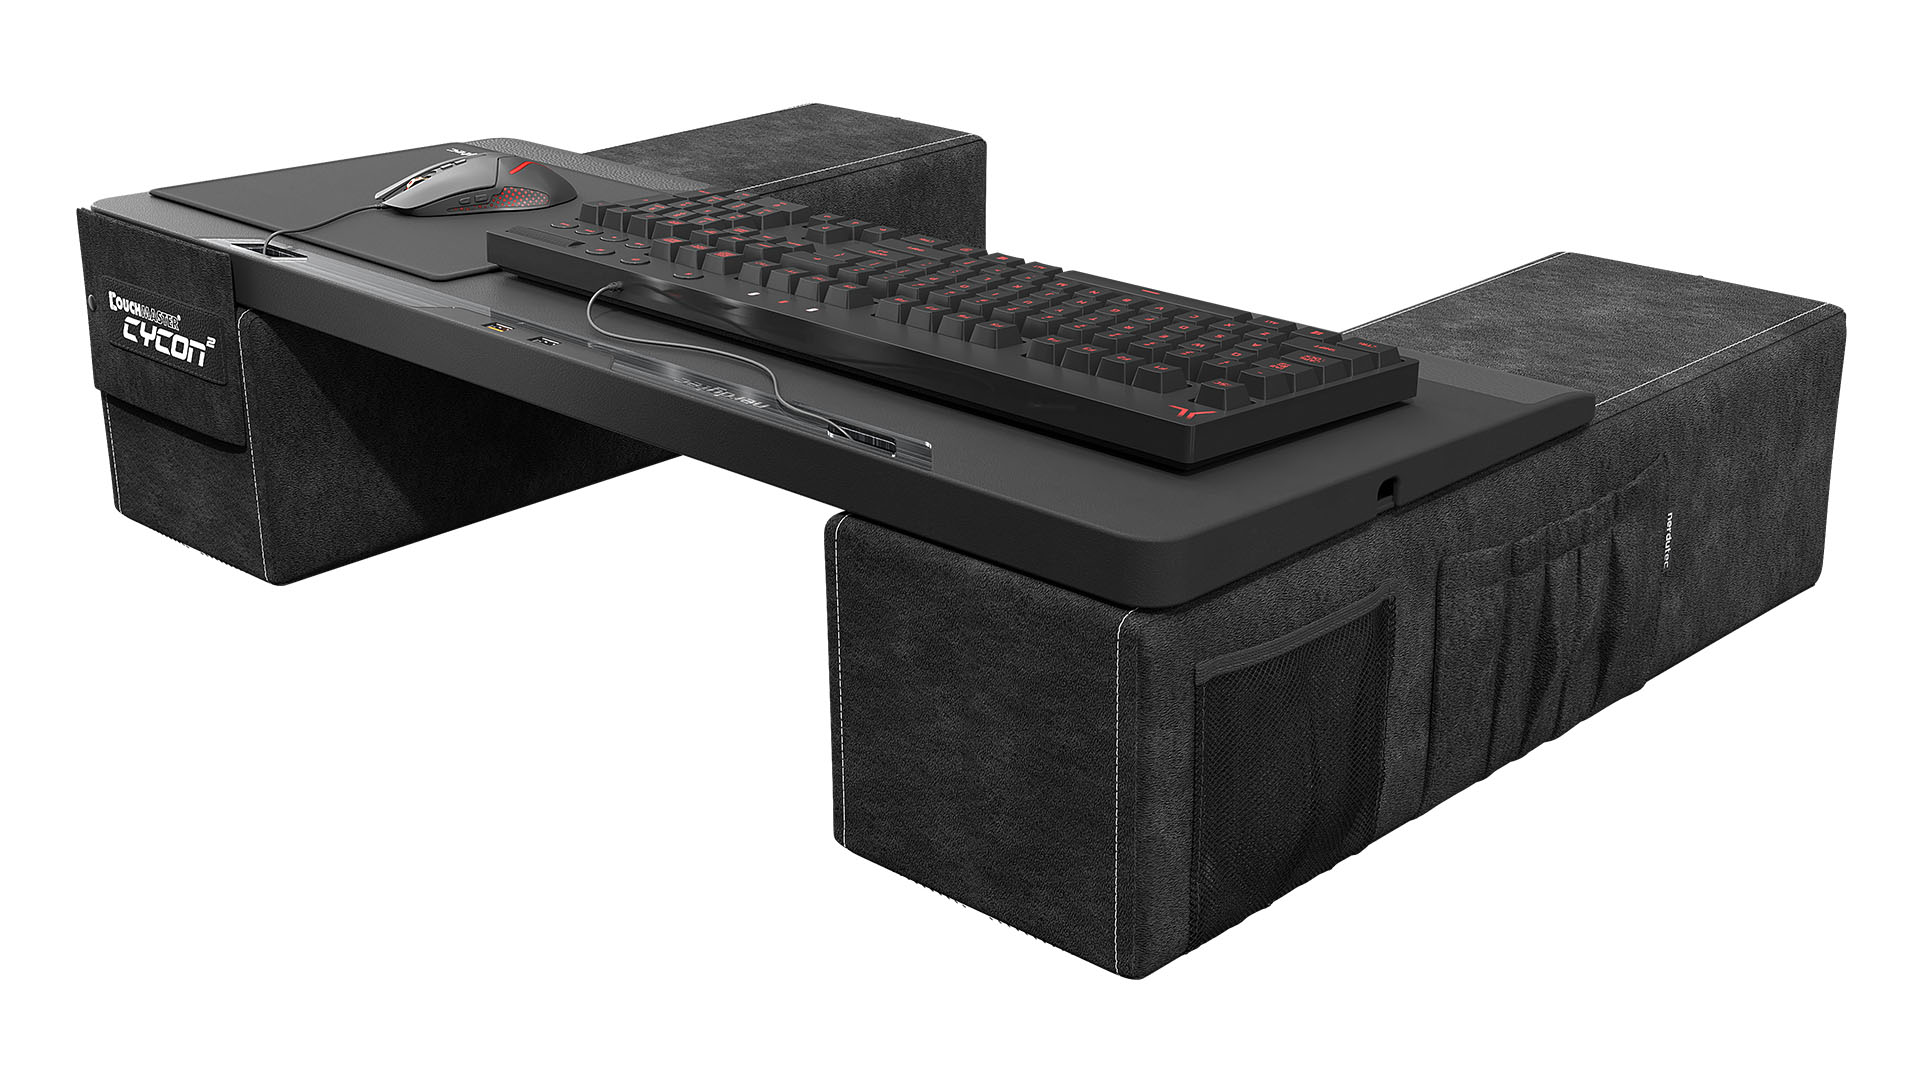 COUCHMASTER Cycon – The ultimate Couch-Gaming solution !